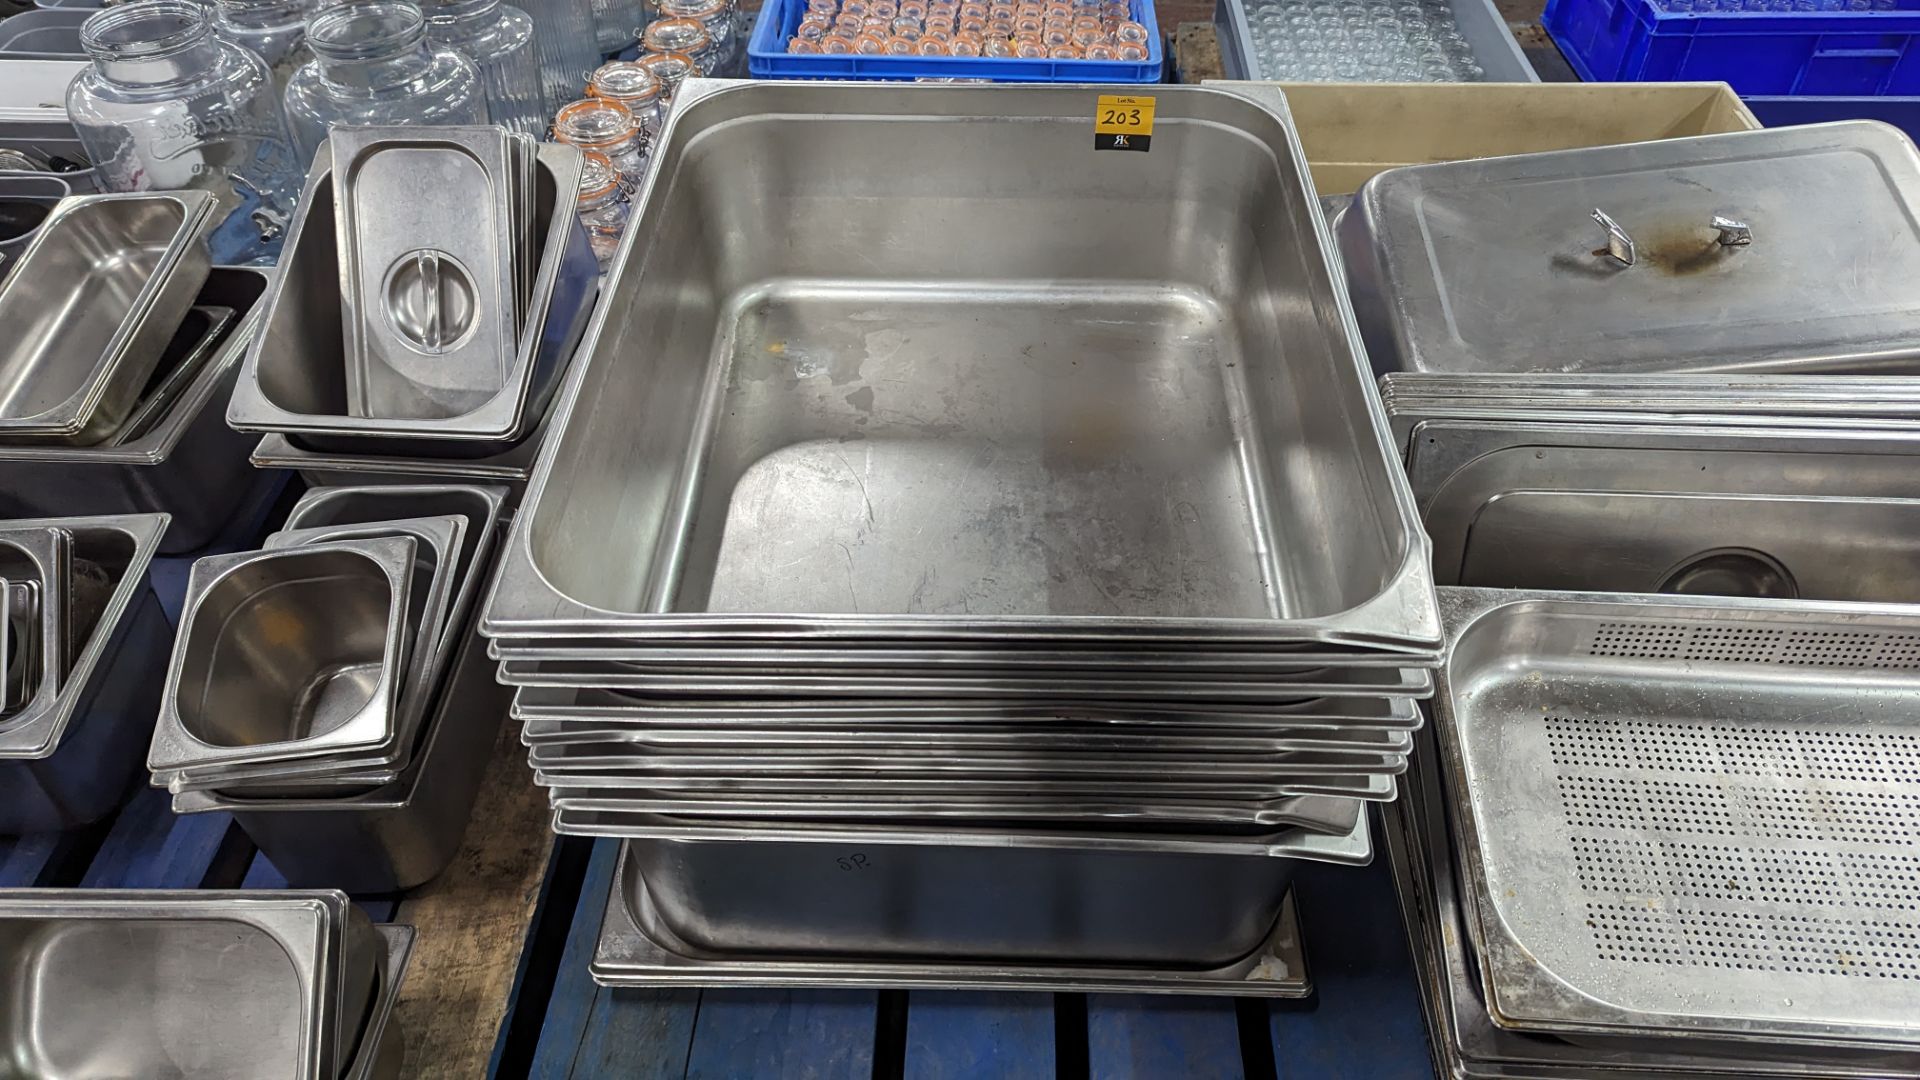 Stack of 11 large rectangular stainless steel shallow trays & deep dishes - Image 4 of 4